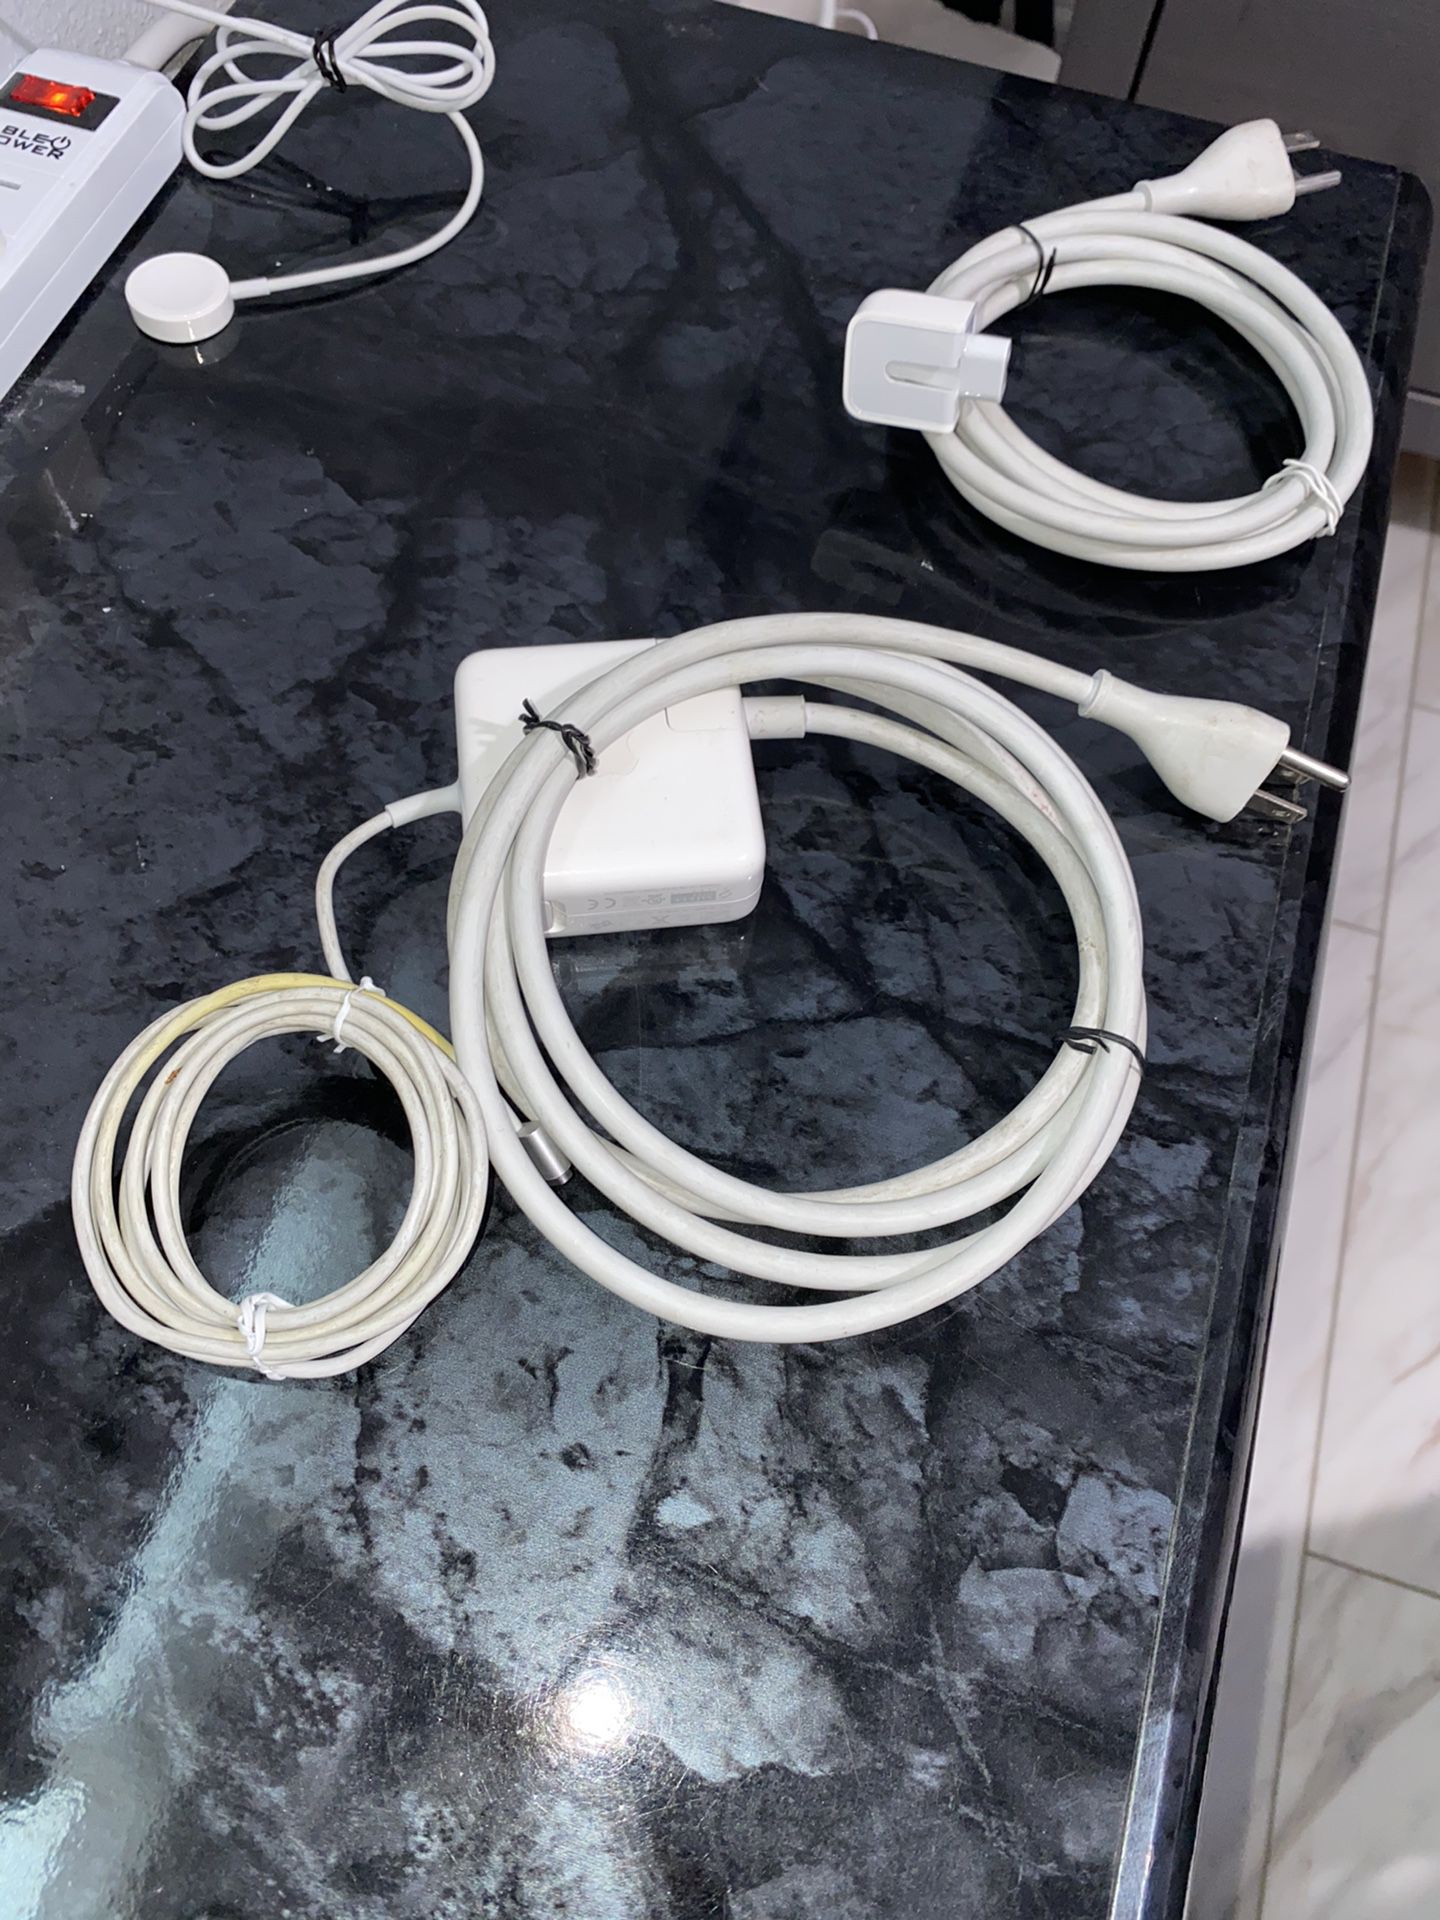 Macbook charger with extension